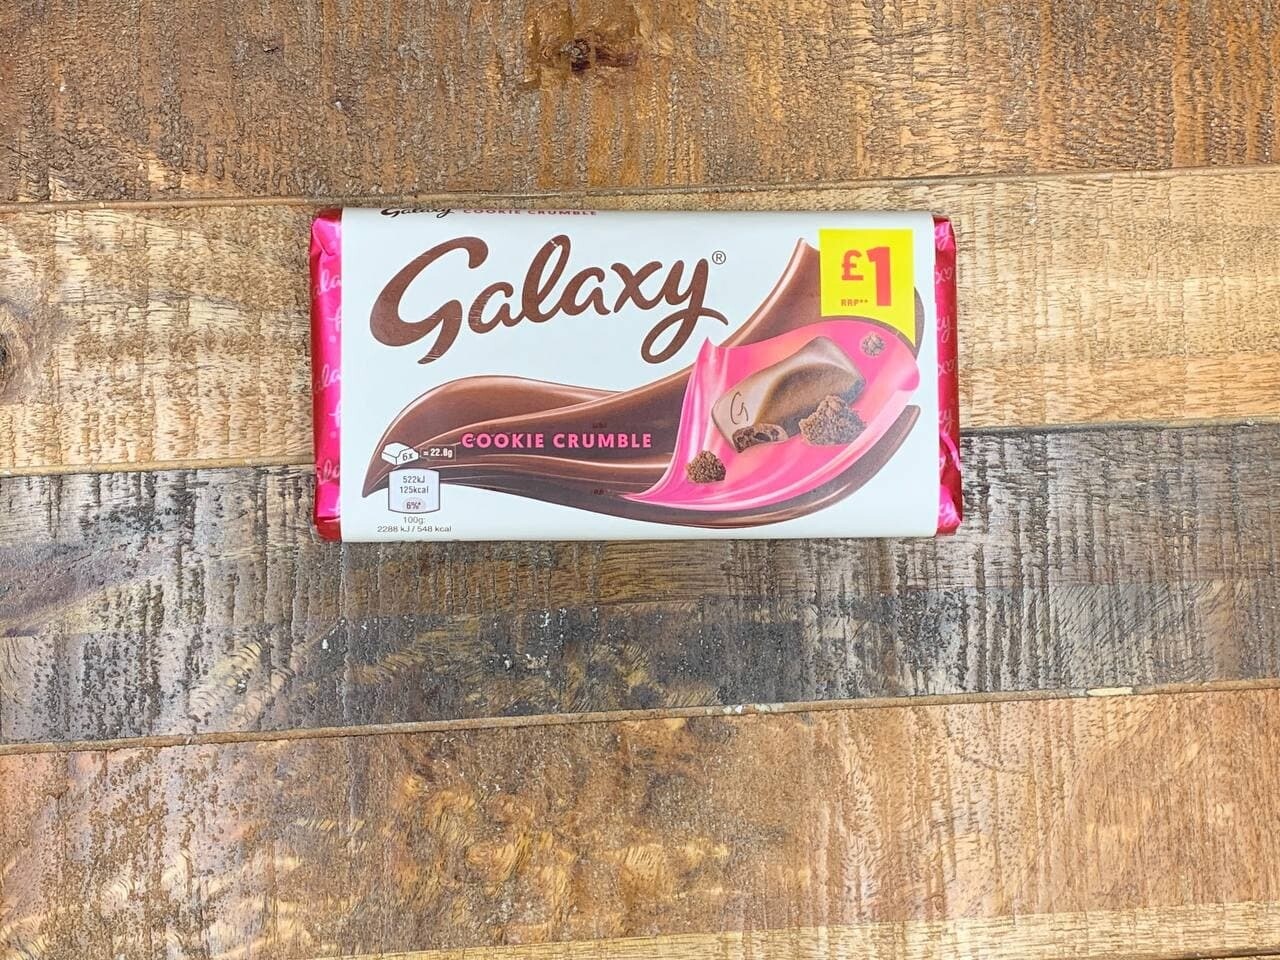 Galaxy Cookie Crumble 114g Past Date Promo